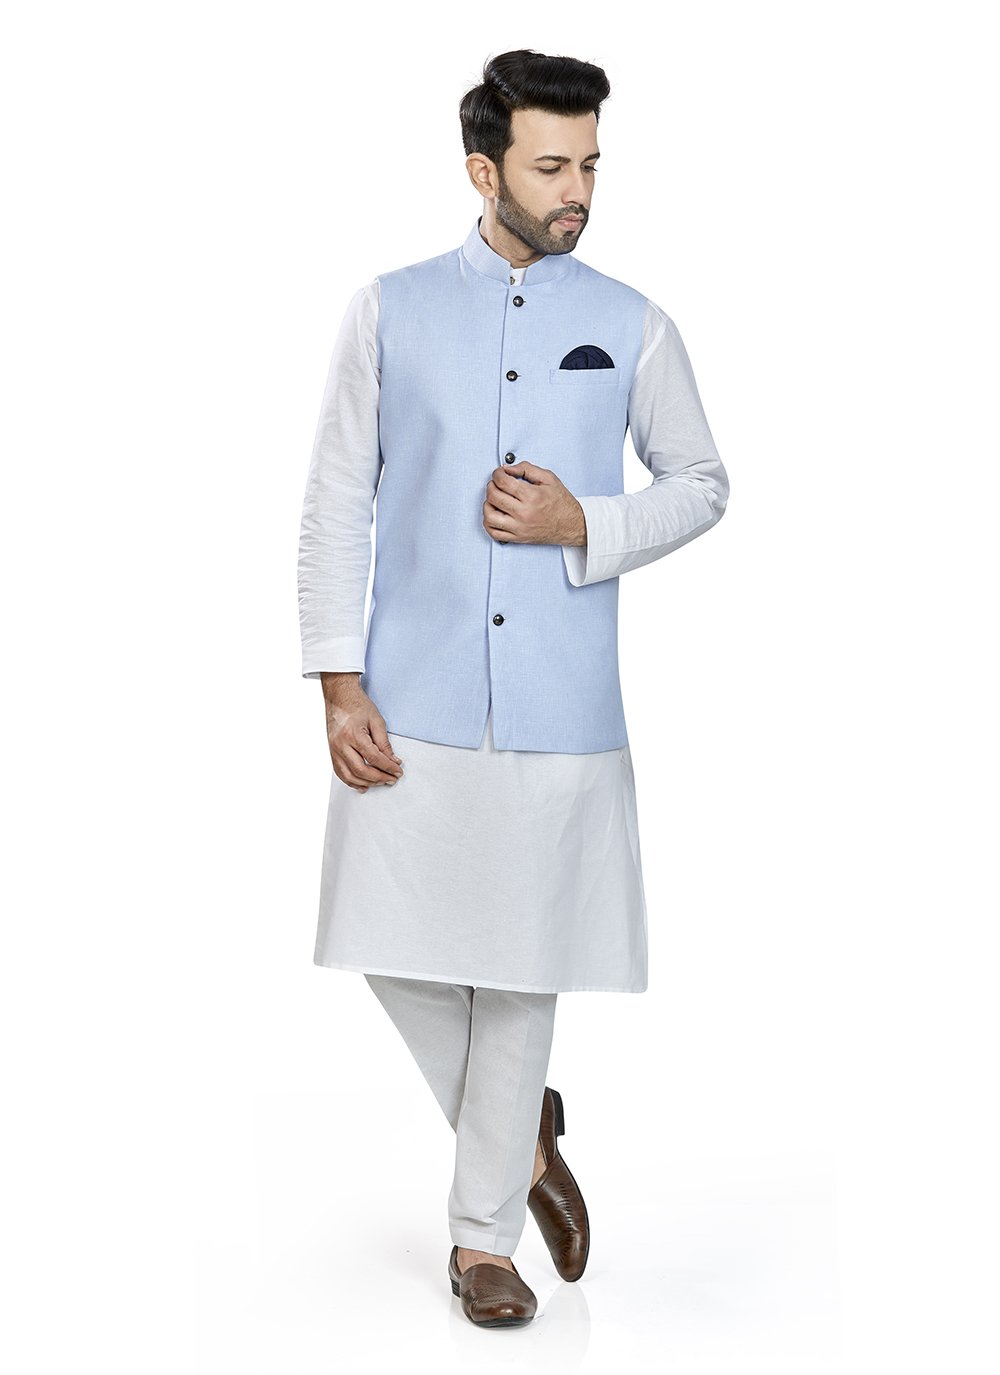 Buttons Linen Kurta Payjama With Jacket in Turquoise and White